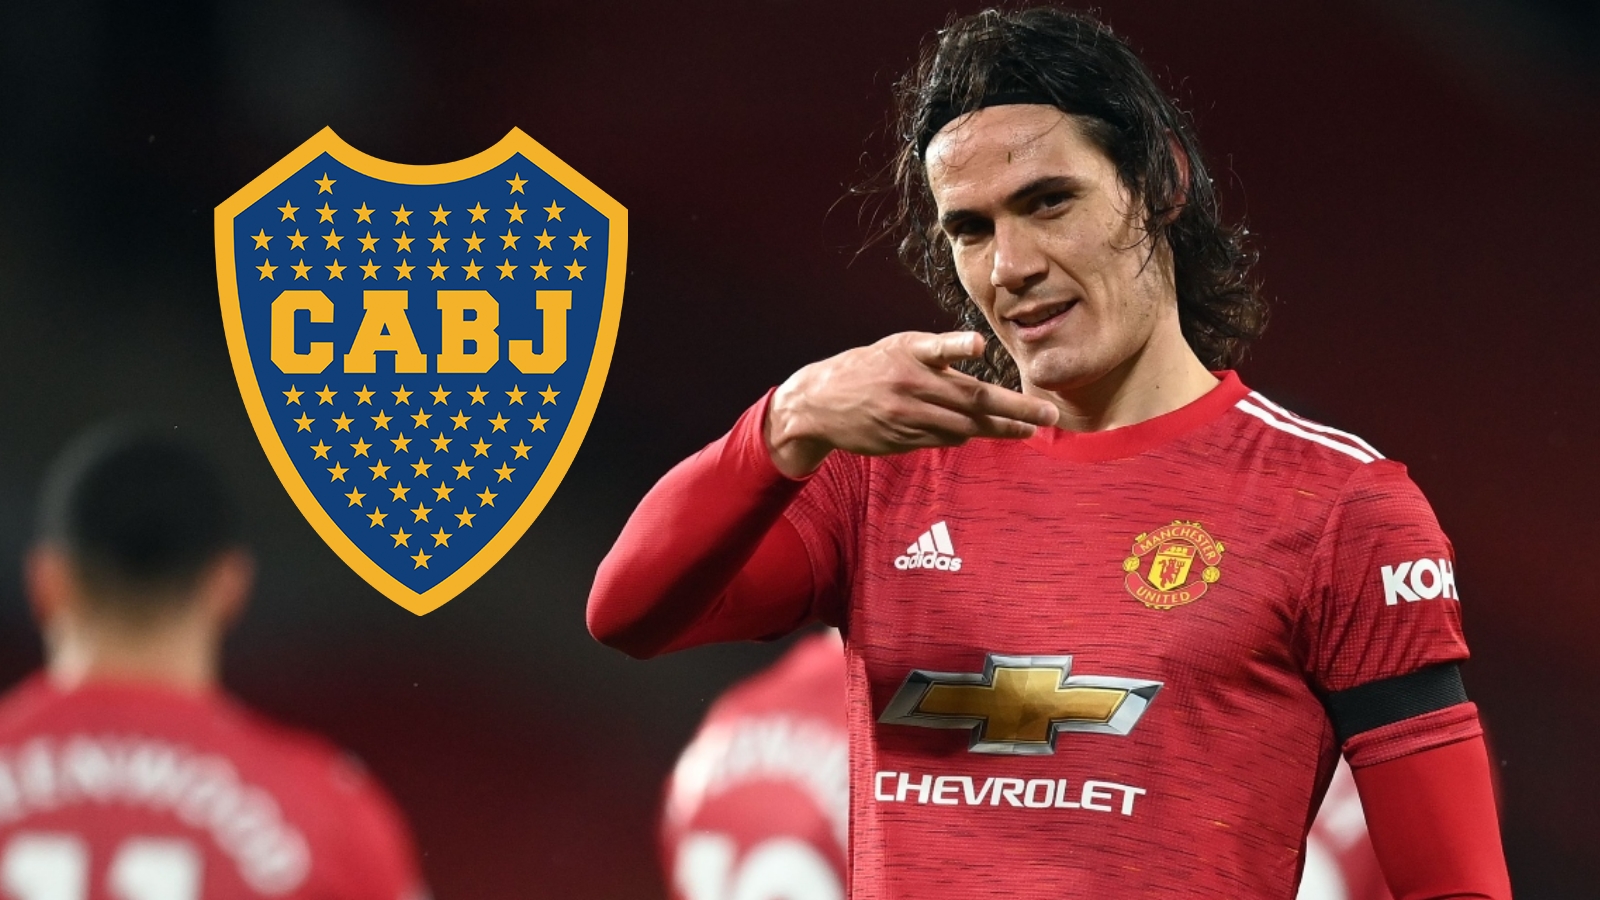 ‘I can see him going’ – Cavani tipped for Man Utd exit by Ince as Boca Juniors talk builds